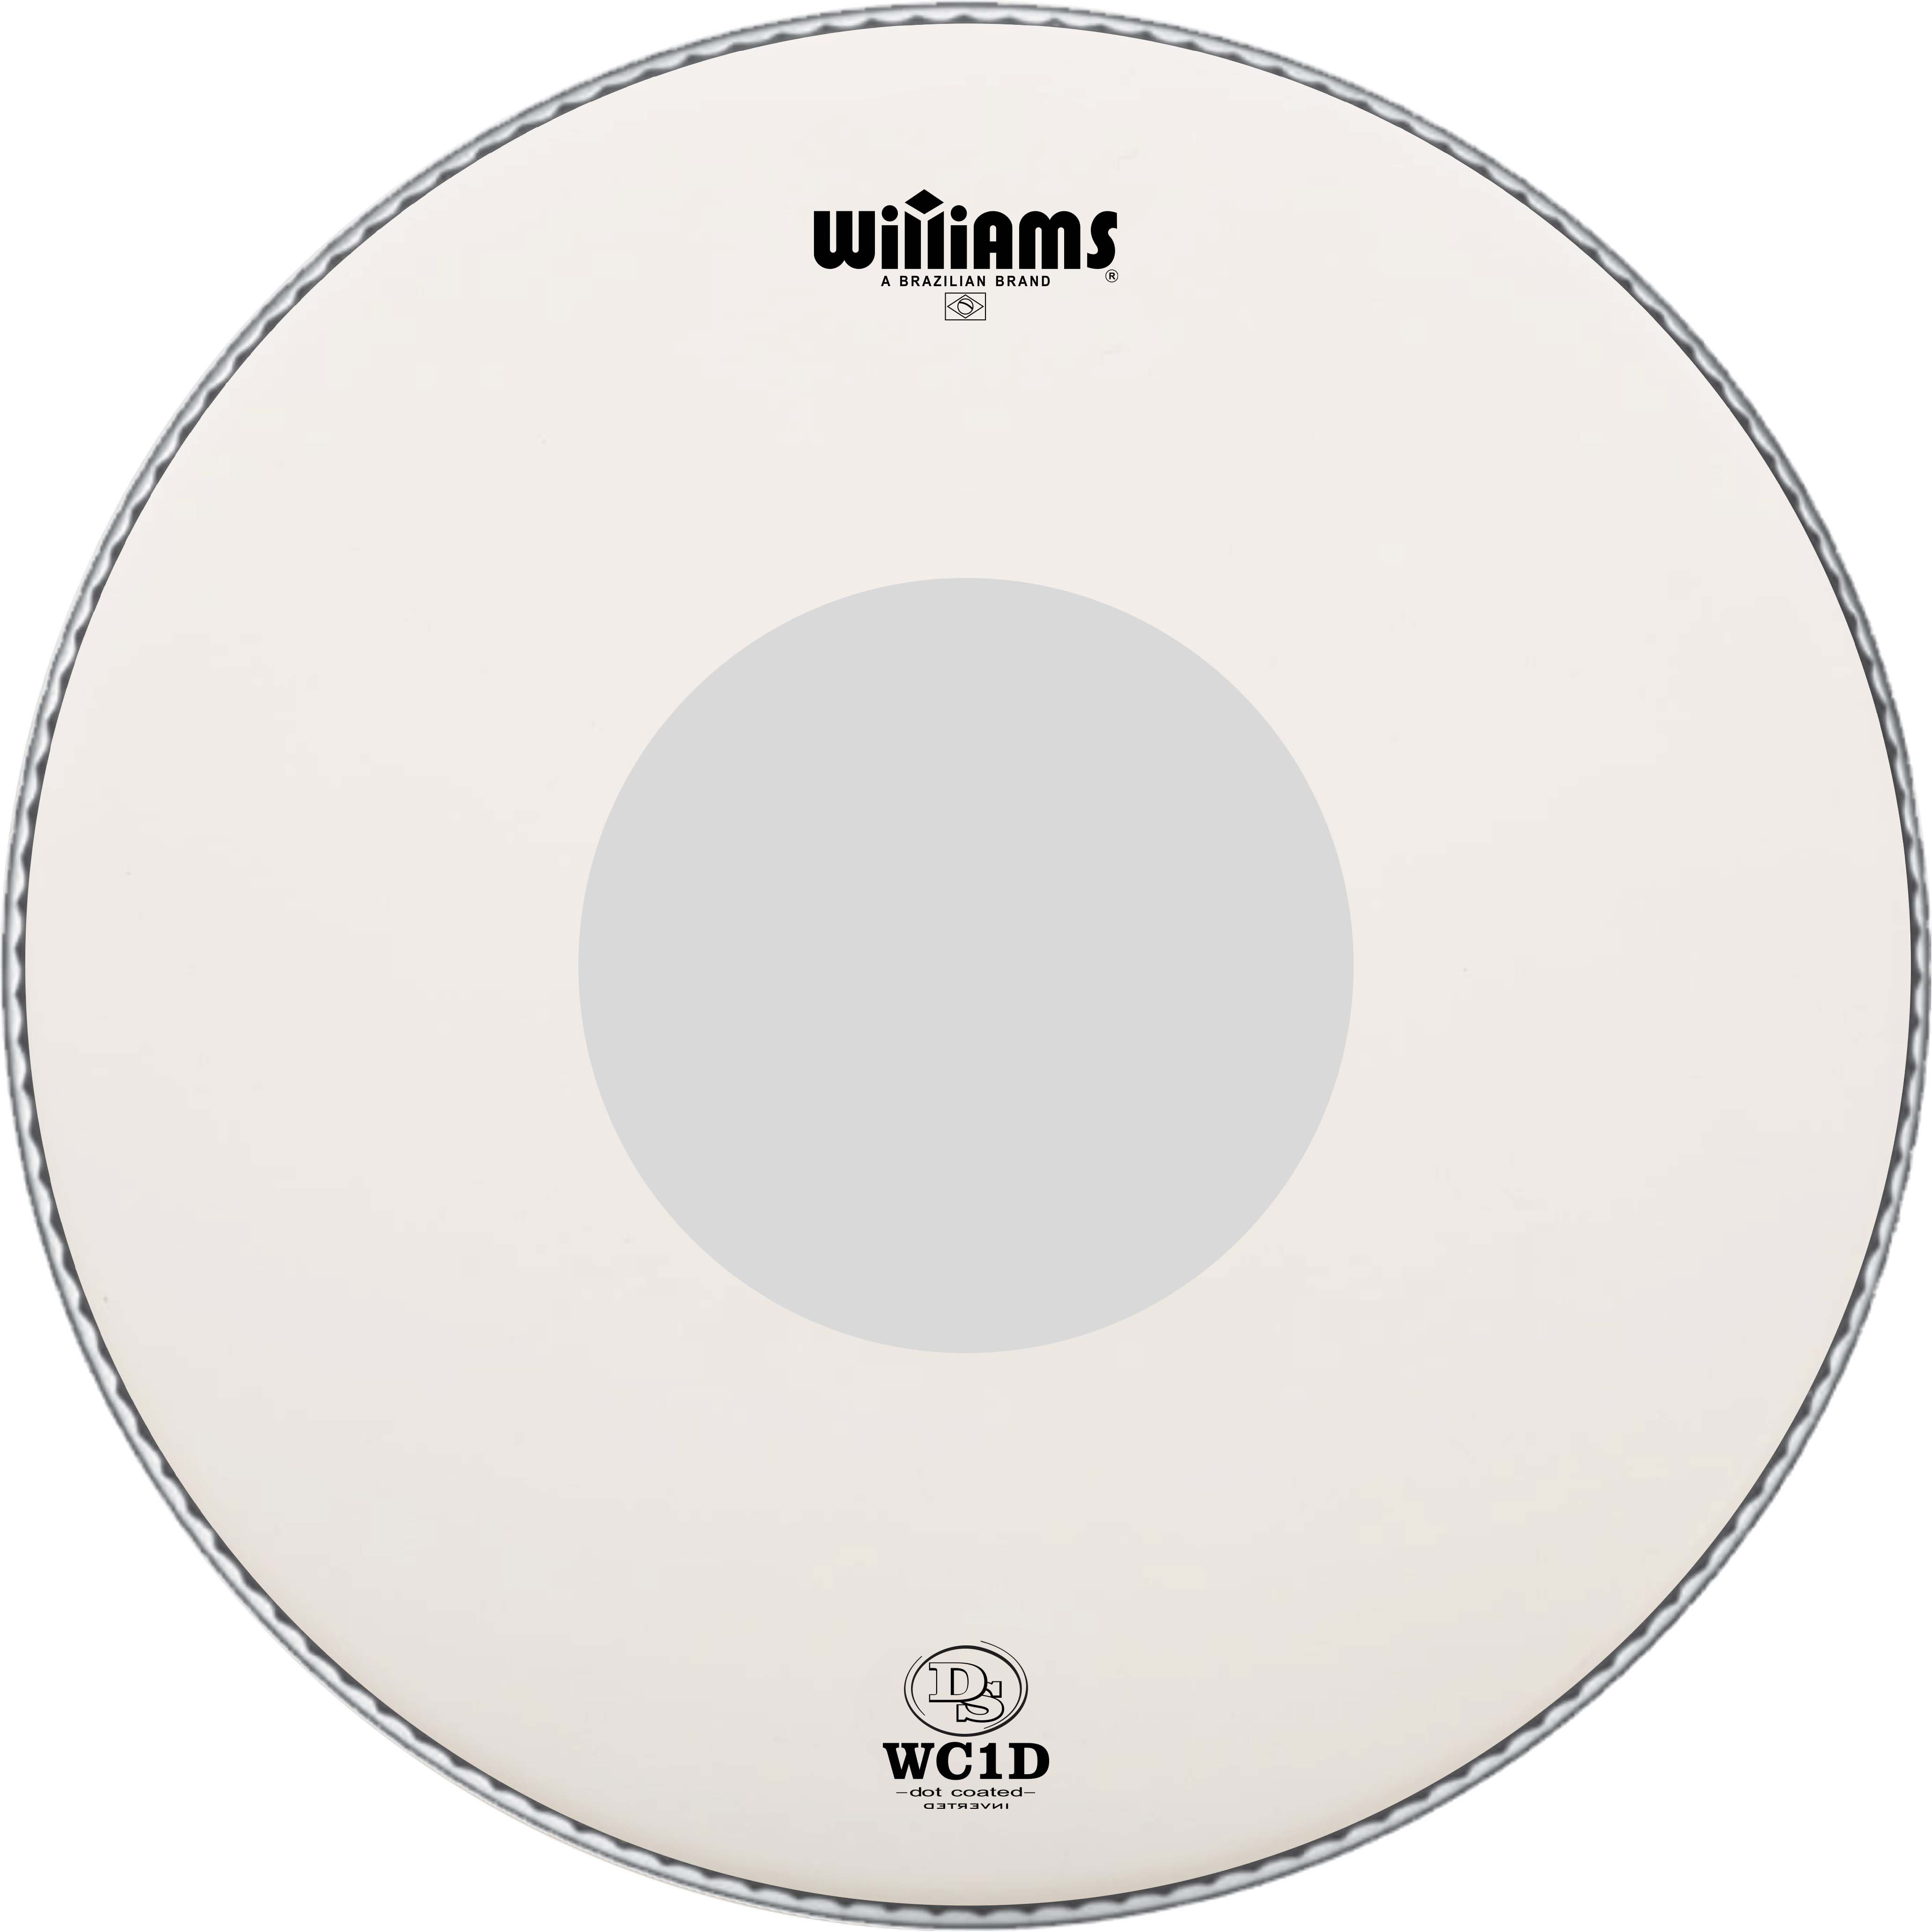 Williams WC1D-10MIL-13 Single Ply Coated Density Inverted Dot Series 13", 10-MIL Пластики для малого барабана и томов